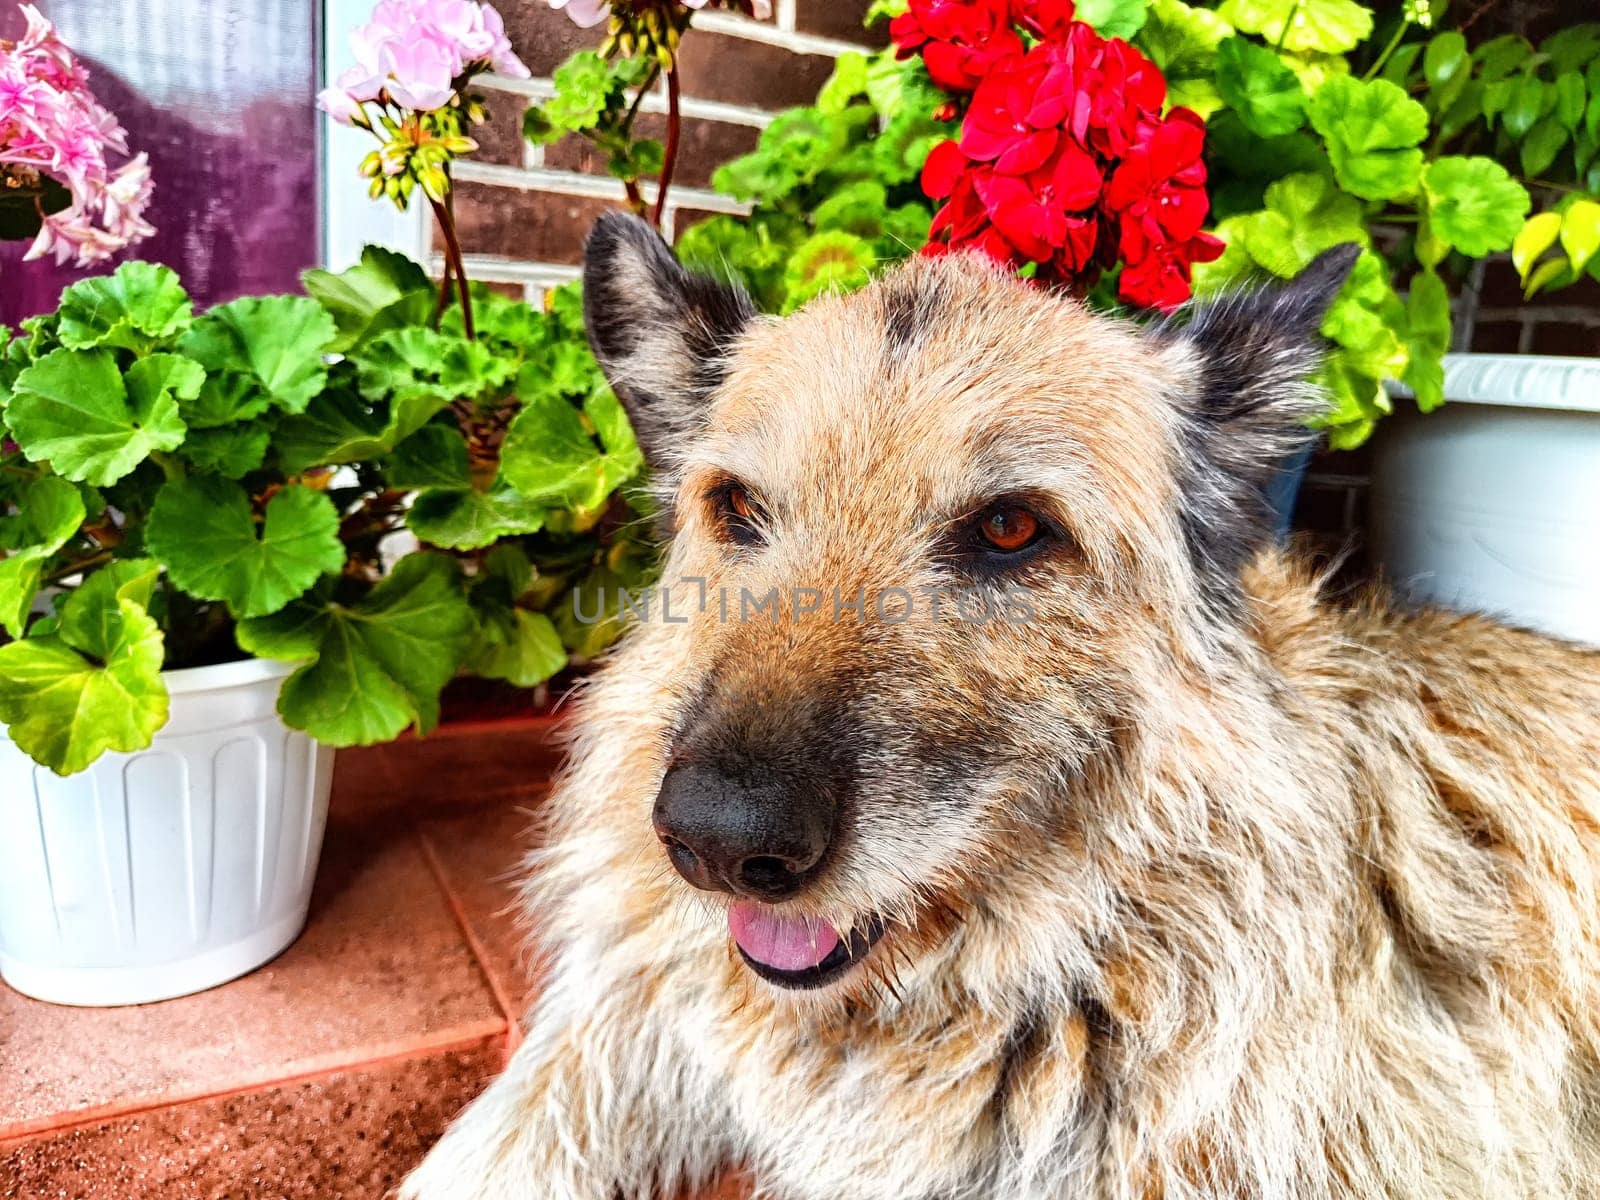 Alert Mixed-Breed Dog Sitting on Patio Surrounded by Potted Plants. A brindle-coated dog with ears perked up, sitting among colorful flowers